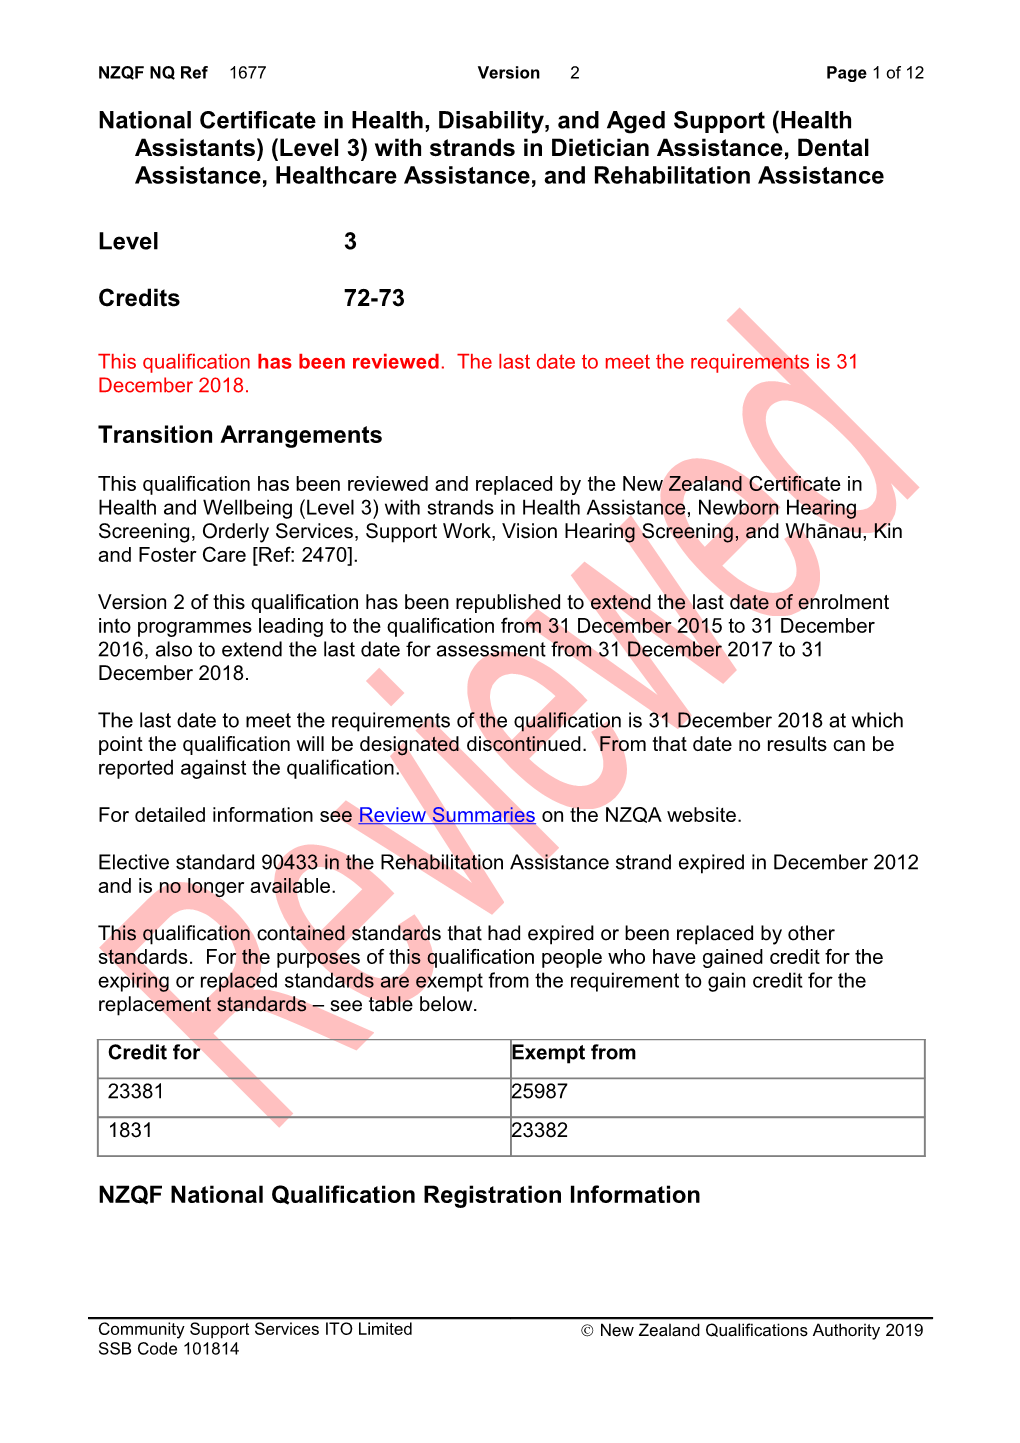 1677 National Certificate in Health, Disability, and Aged Support (Health Assistants) (Level